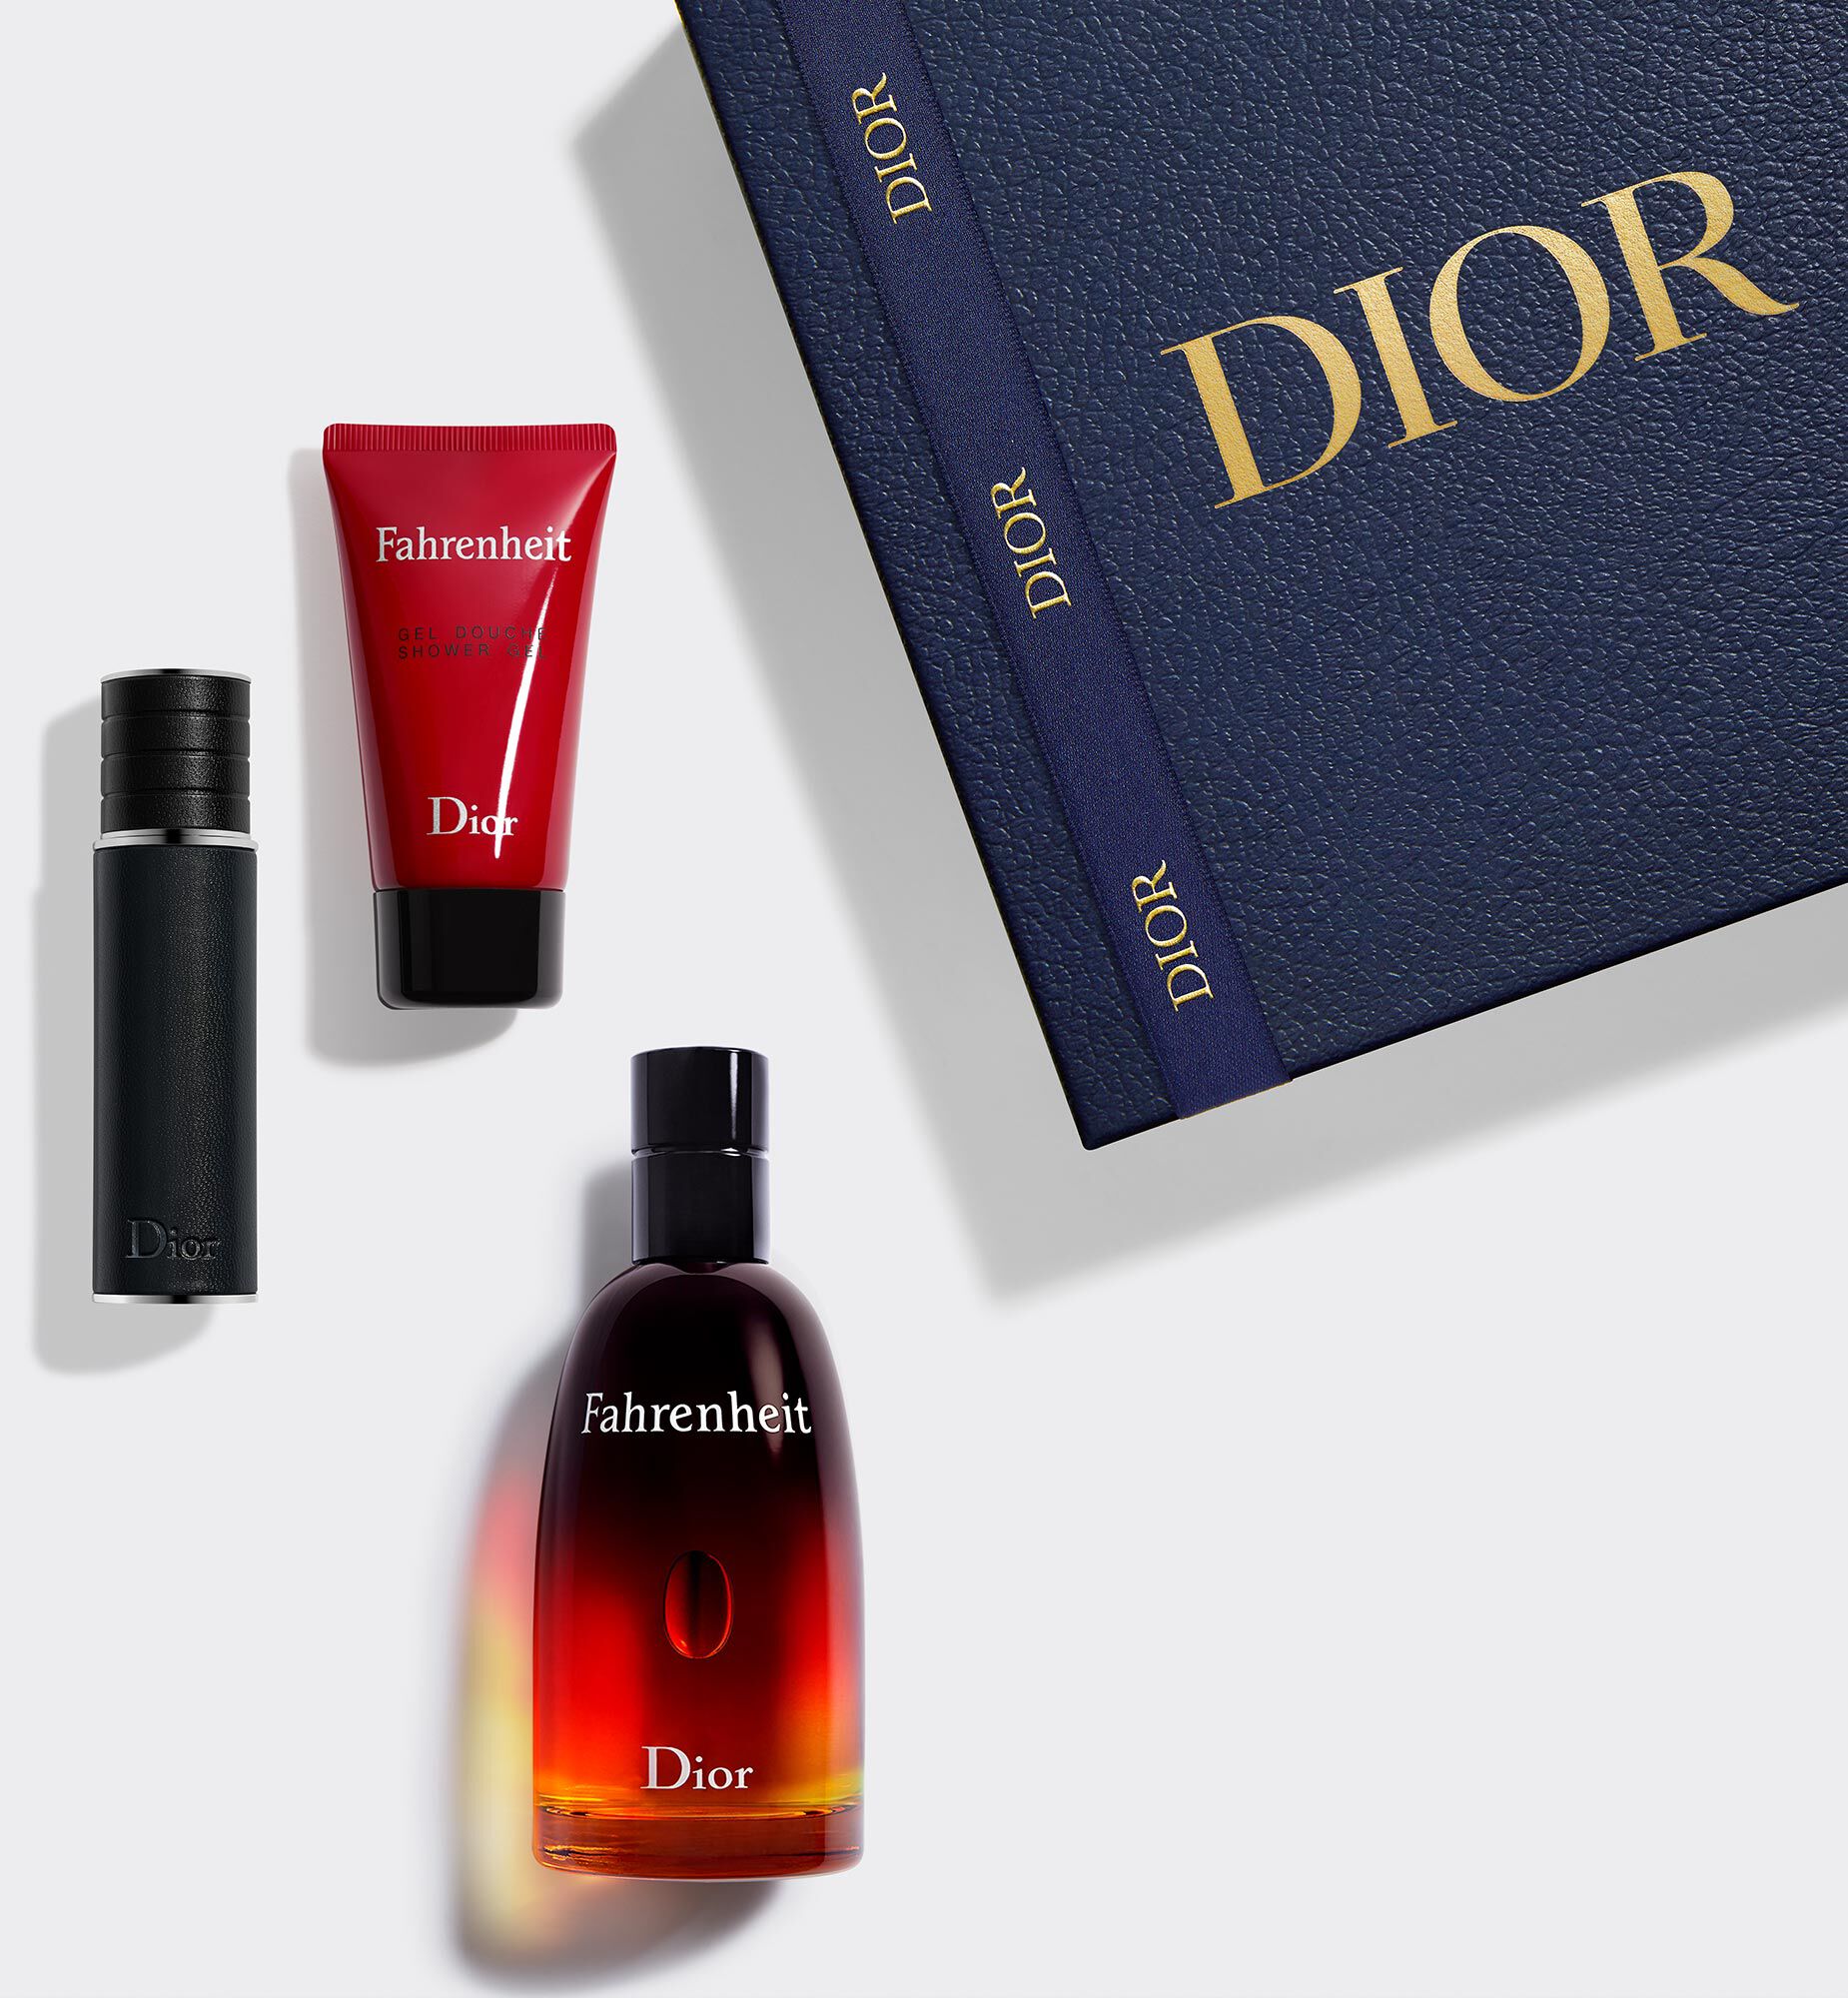 Dior Gift Pouch Skincare Lip Makeup and Fragrance  DIOR